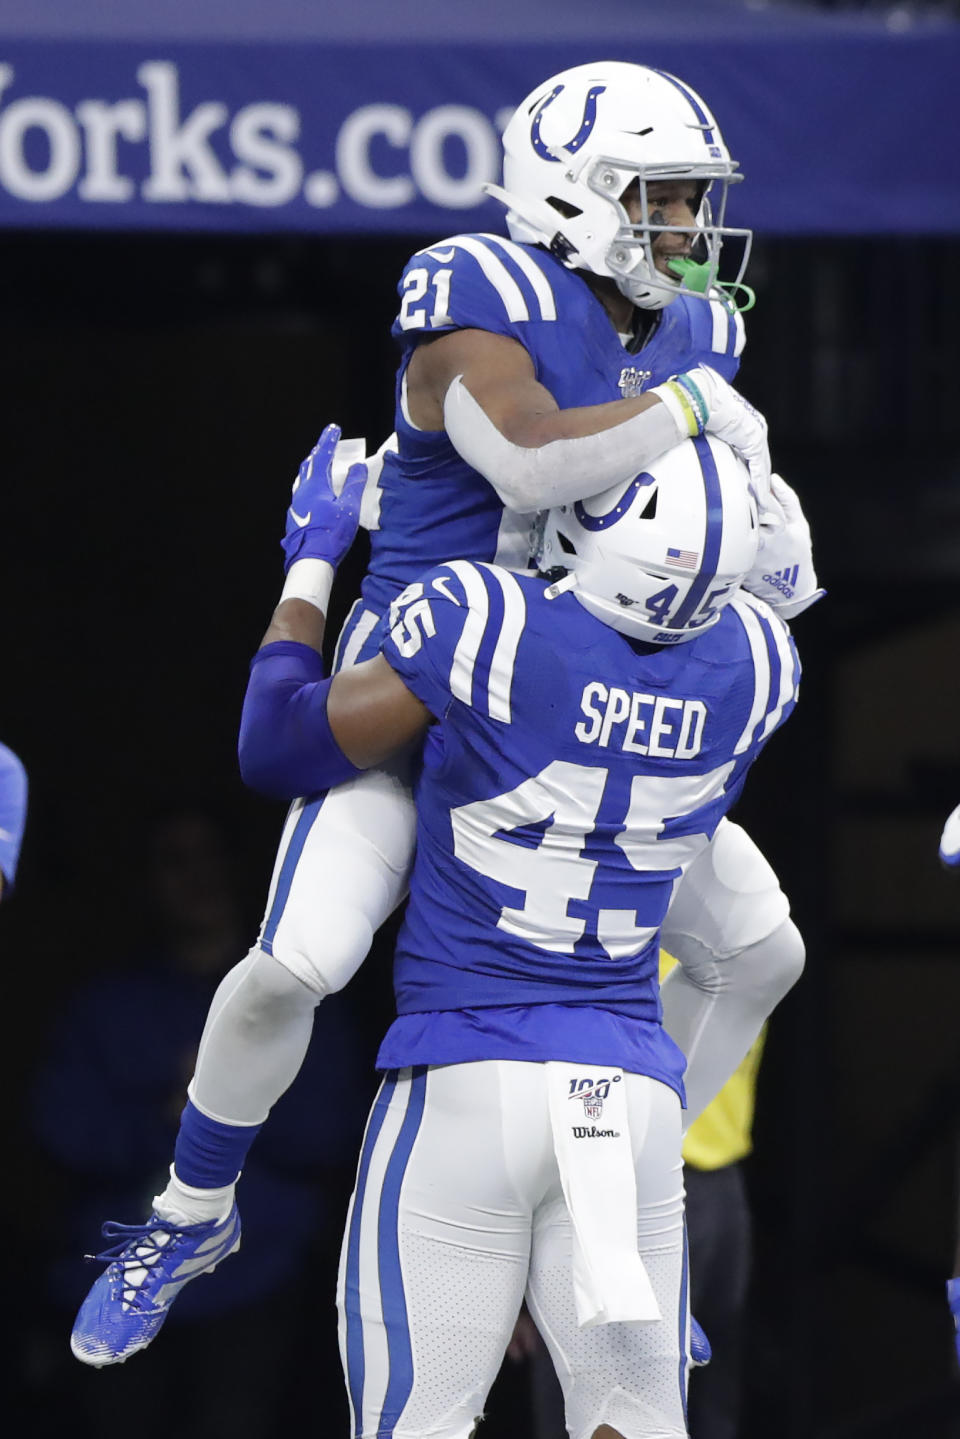 Indianapolis Colts' Nyheim Hines (21) celebrates with E.J. Speed (45) after running back a punt for a touchdown during the second half of an NFL football game against the Carolina Panthers, Sunday, Dec. 22, 2019, in Indianapolis. (AP Photo/Michael Conroy)